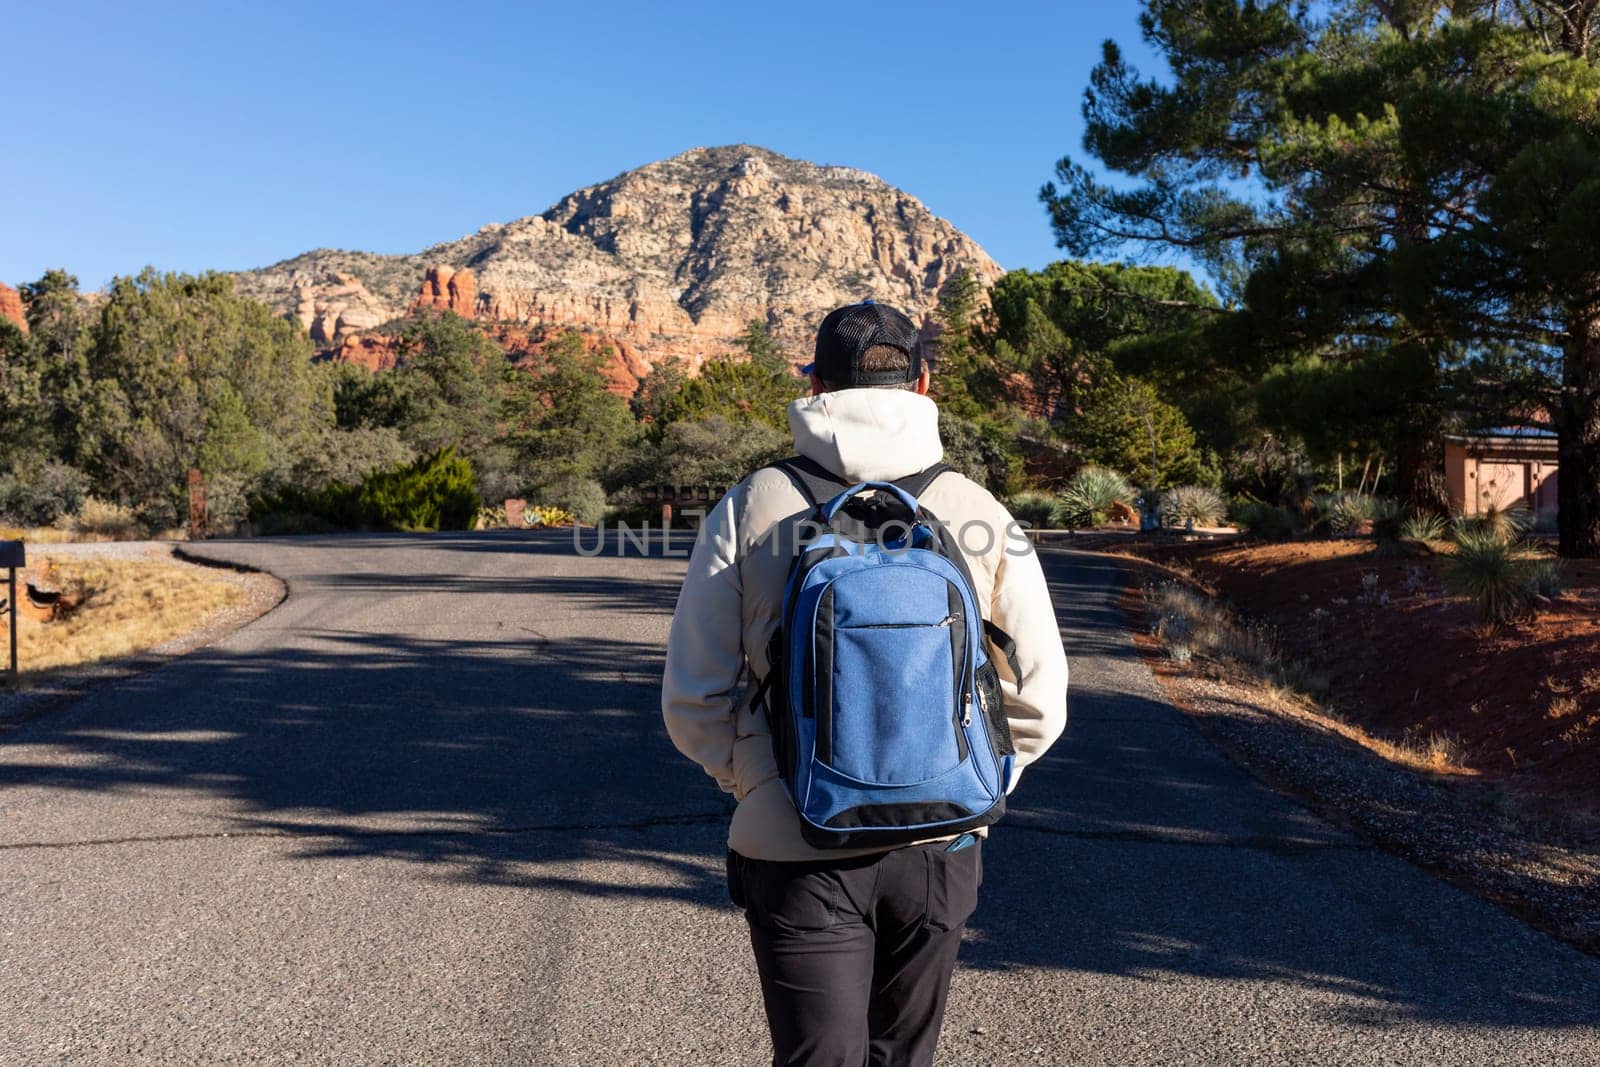 Back View of Male Tourist with Backpack Walking the Road Towards Red Rock Mountain Butte Of Sedona, Arizona, USA Beautiful Scenic Landscape. Tourism and Attraction, Spiritual Place. Horizontal by netatsi